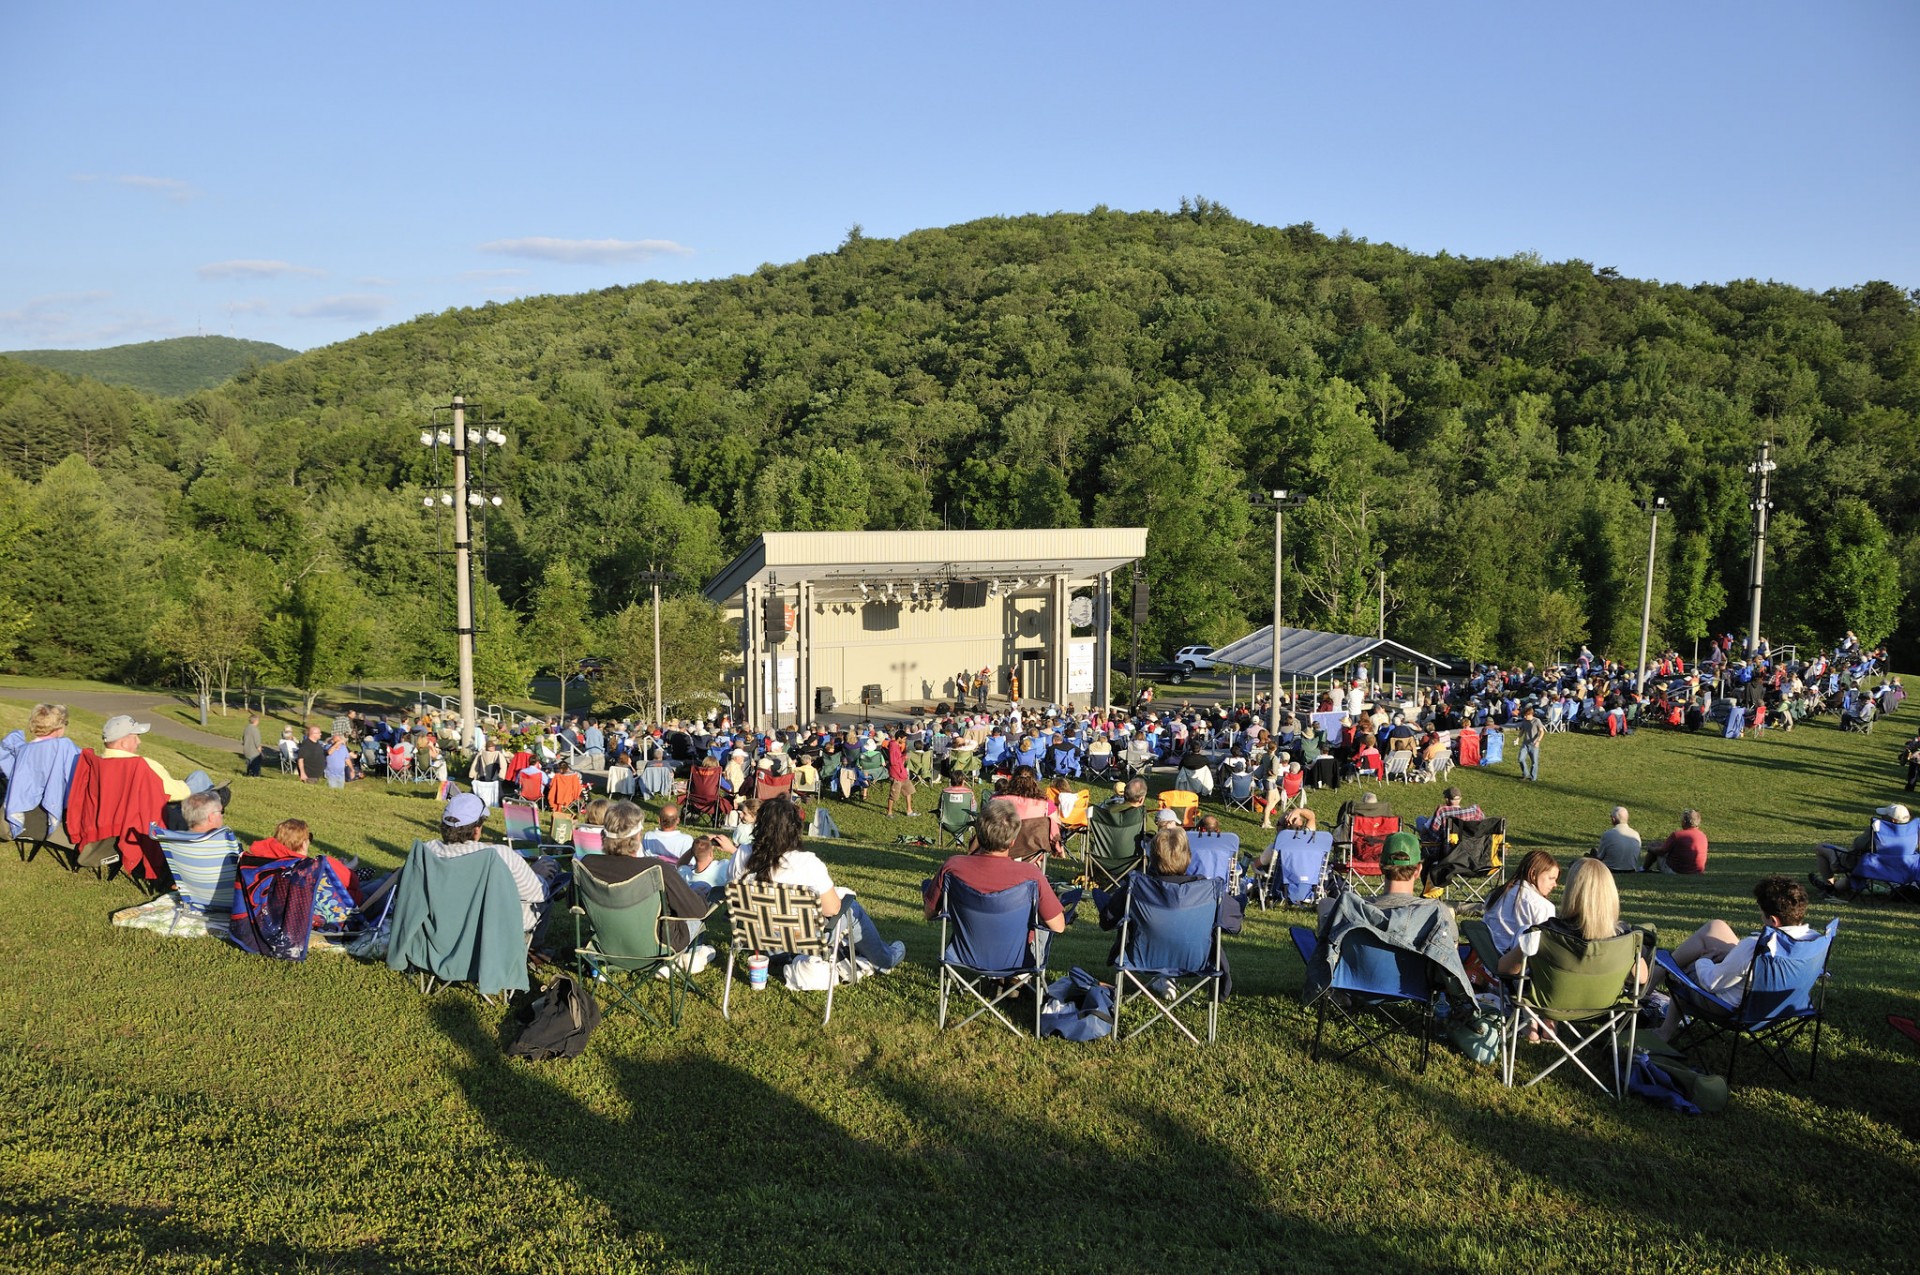 Blue Ridge Music Center amphitheater with crowd during a concert. Photo by Harrol Blevins